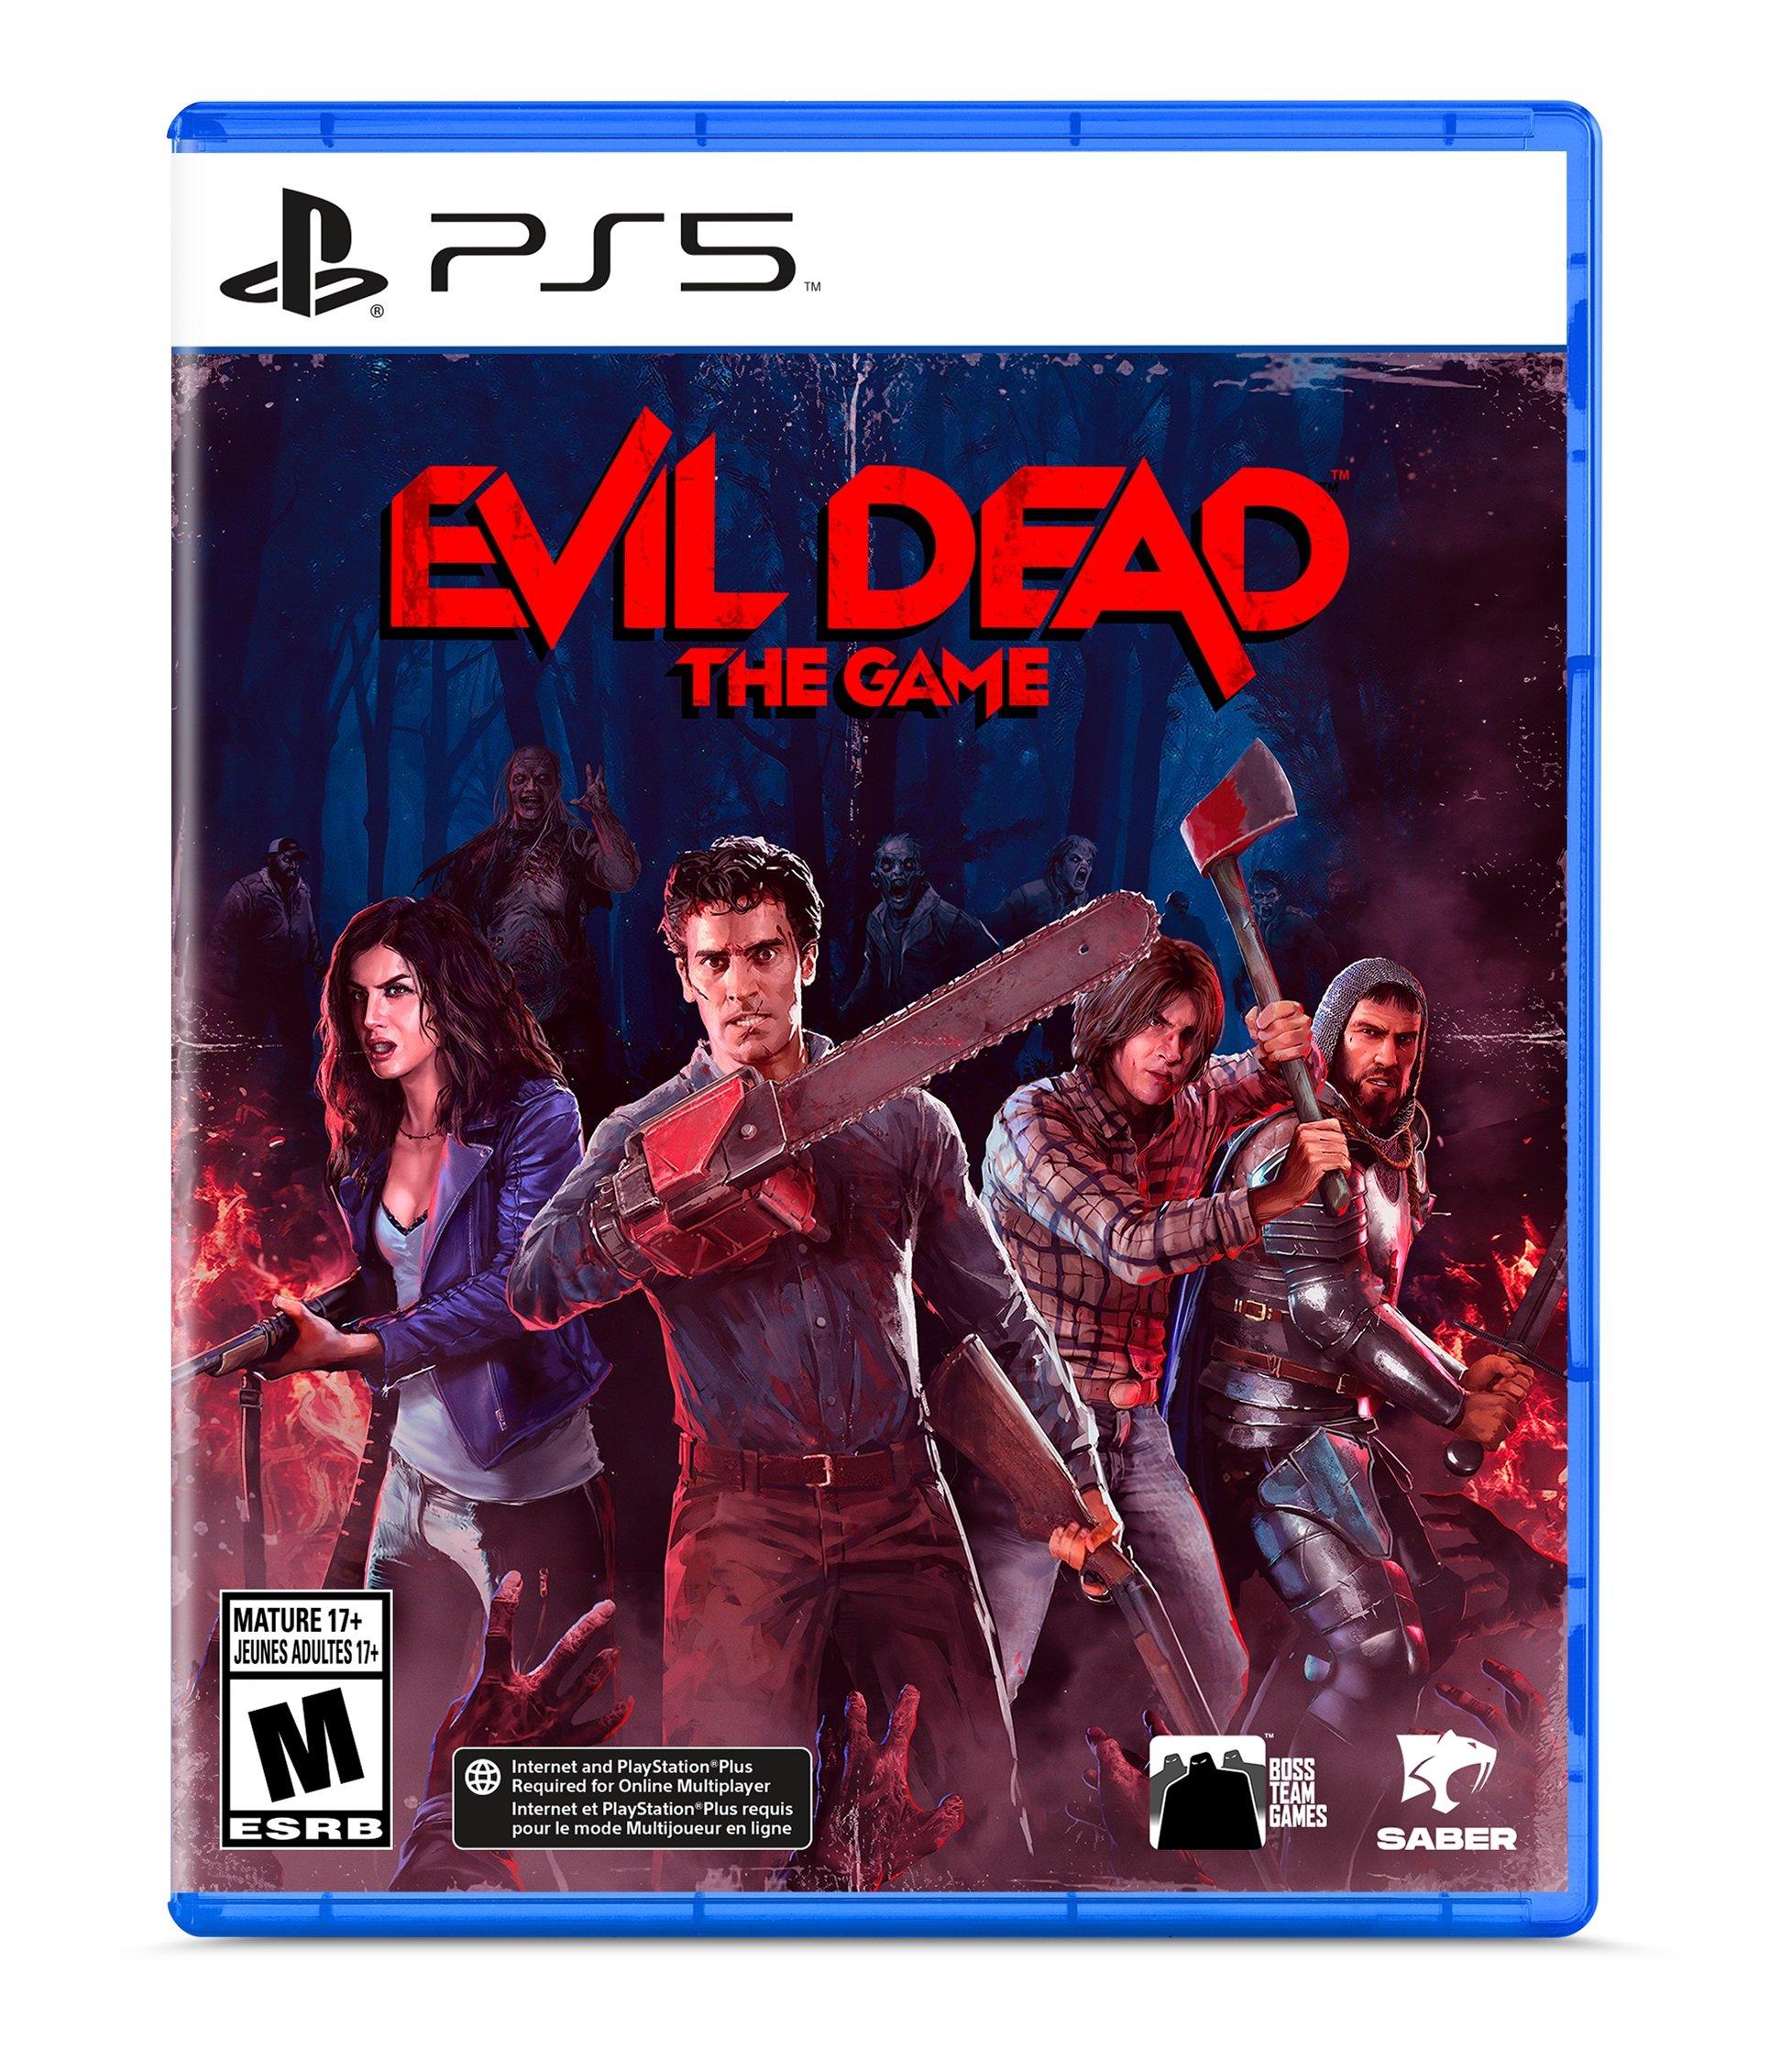 Petition · Save Evil Dead: The Game ·